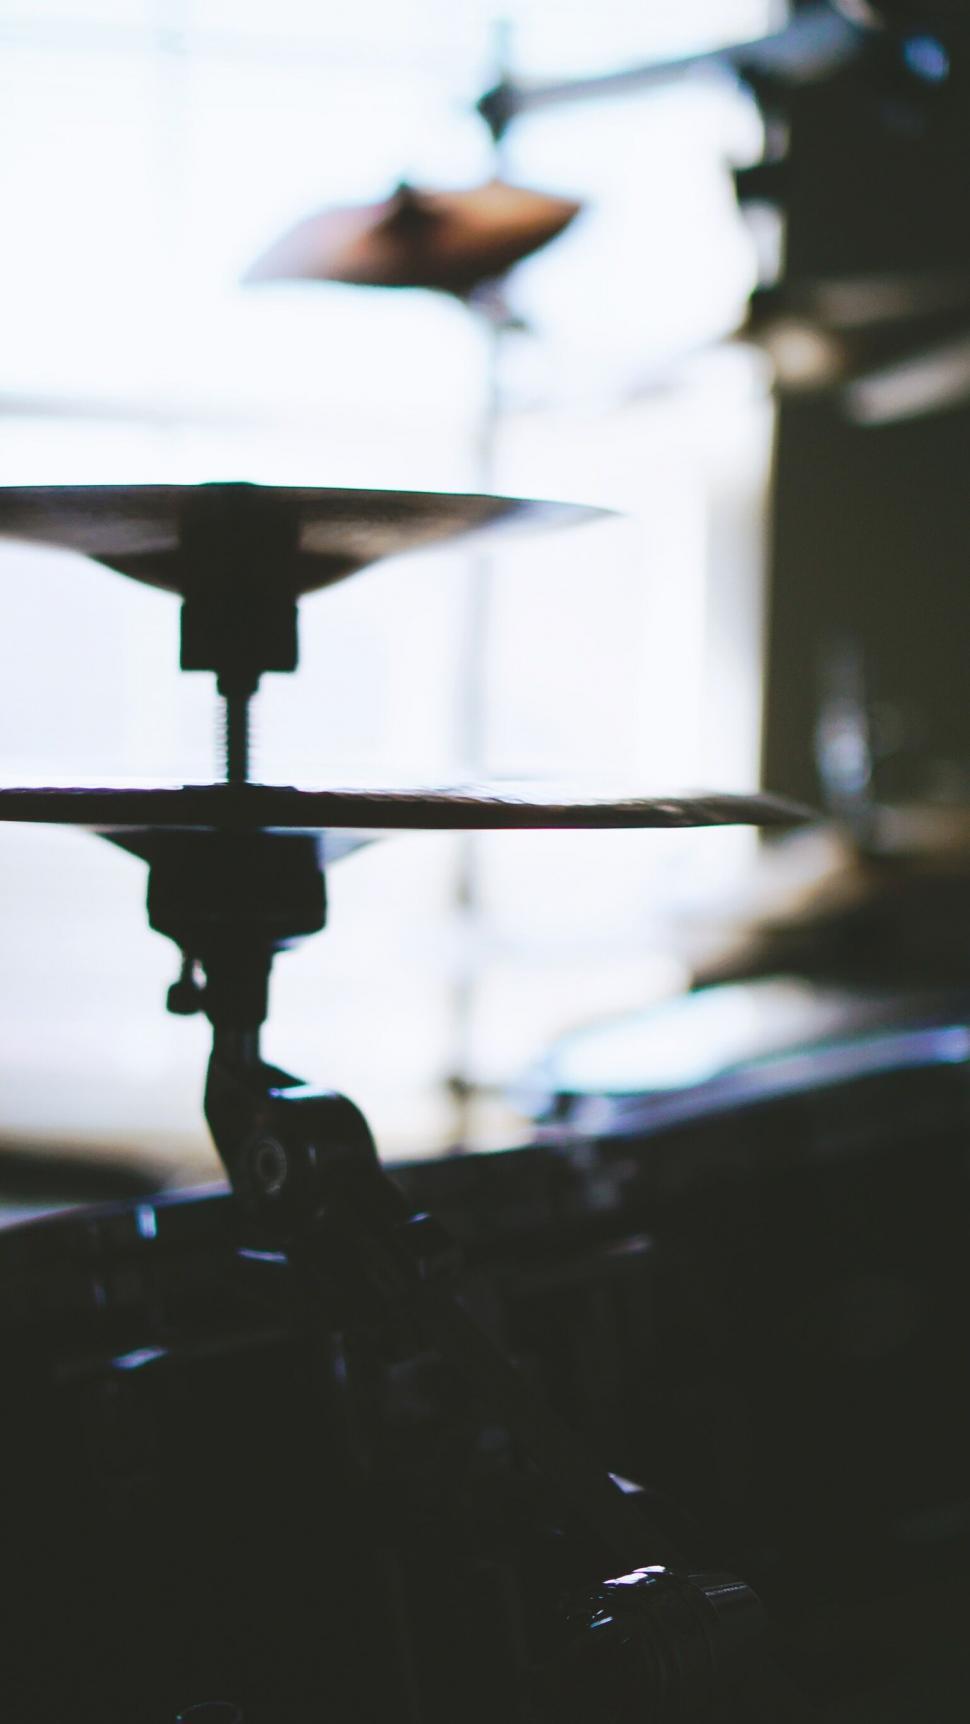 Free Image of Drum cymbal in a blurred music studio 